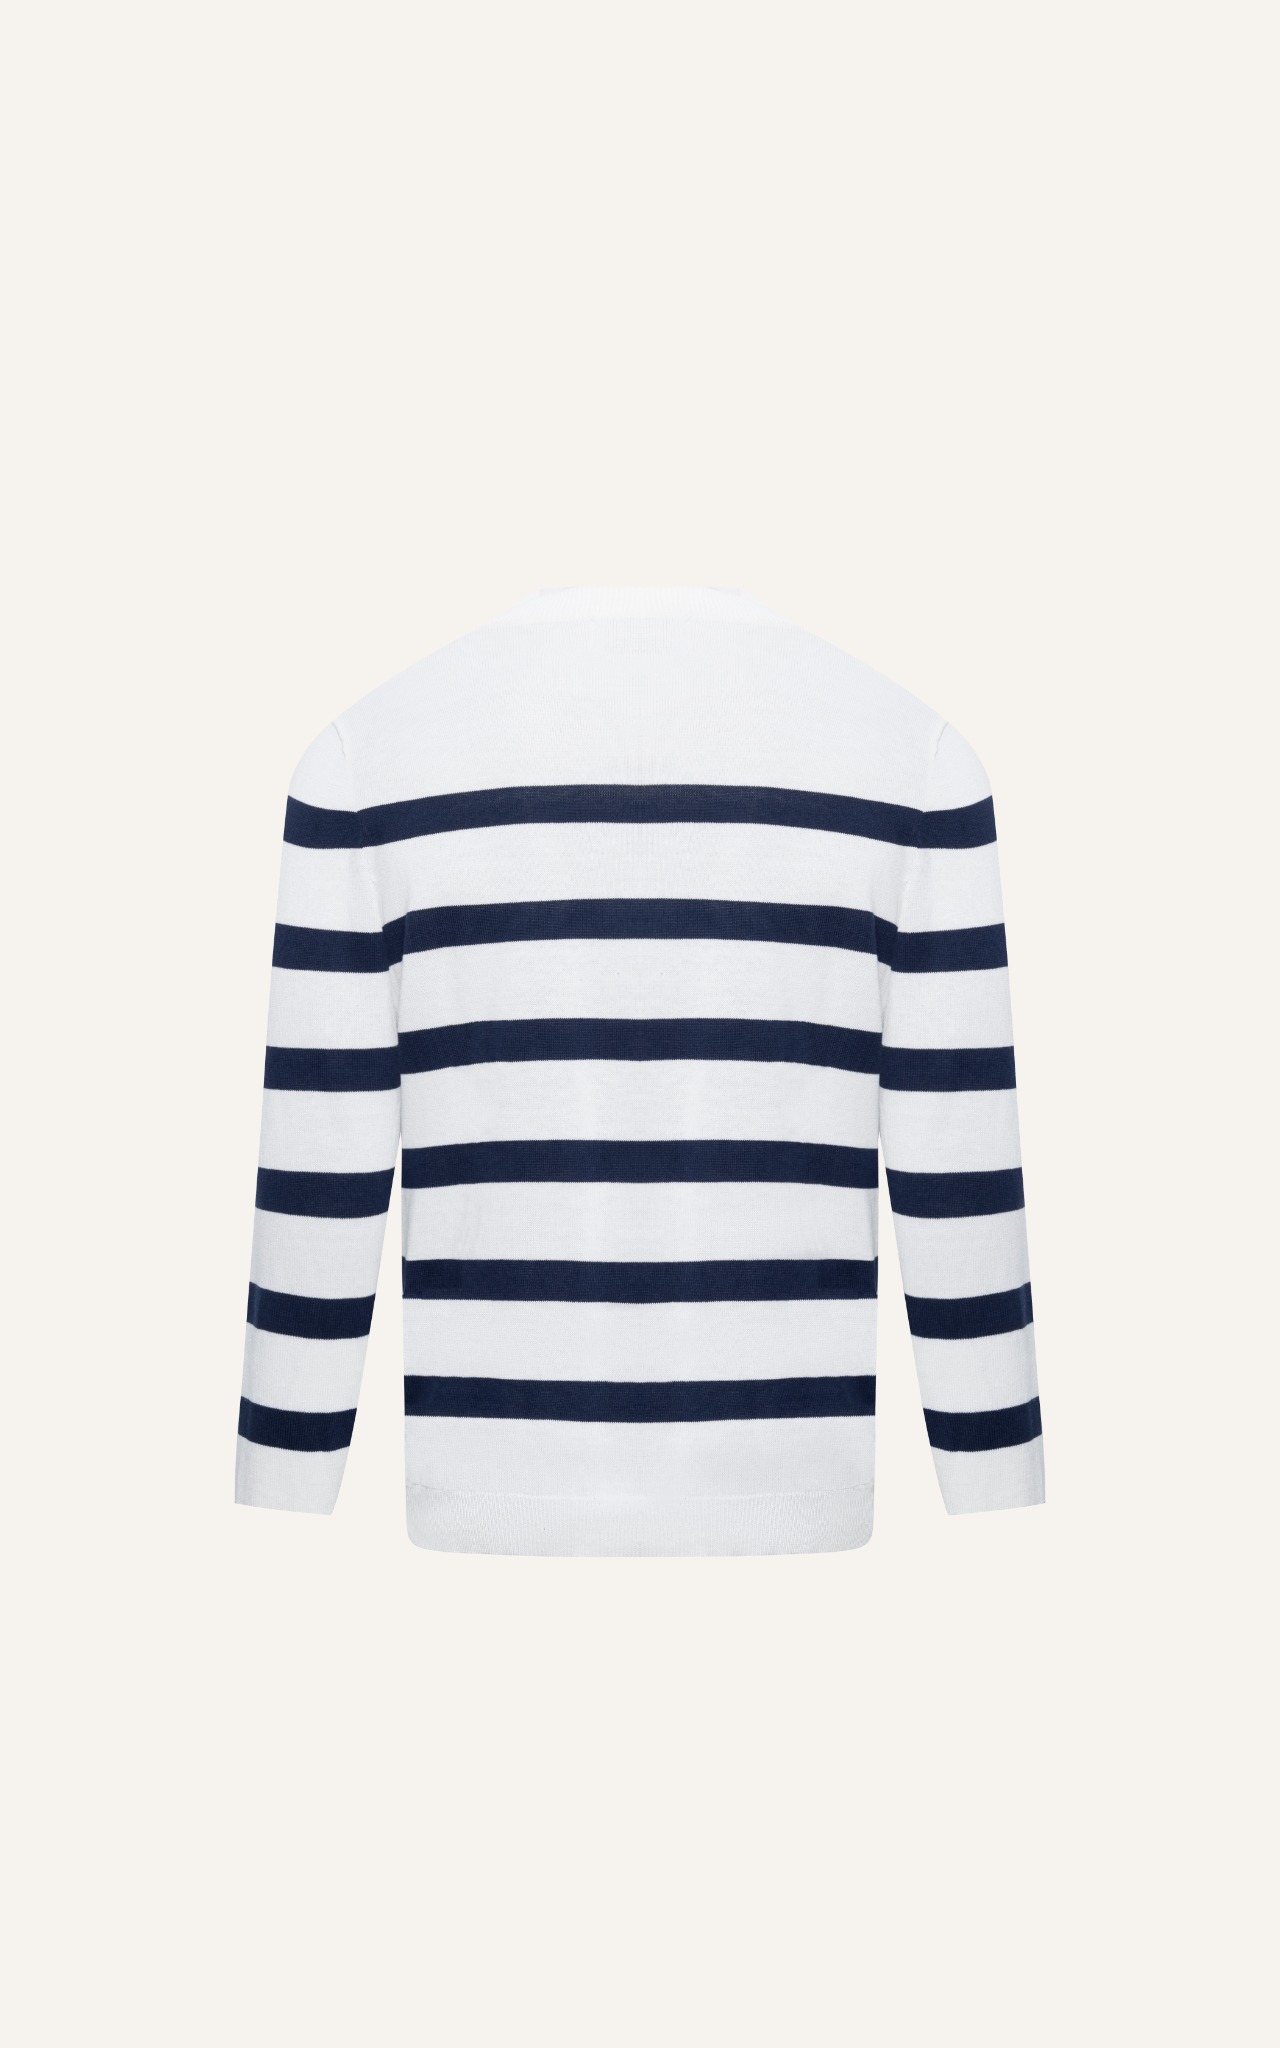 AG708 STUDIO REGULAR FIT STRIPED KNIT SWEATER - OFF WHITE